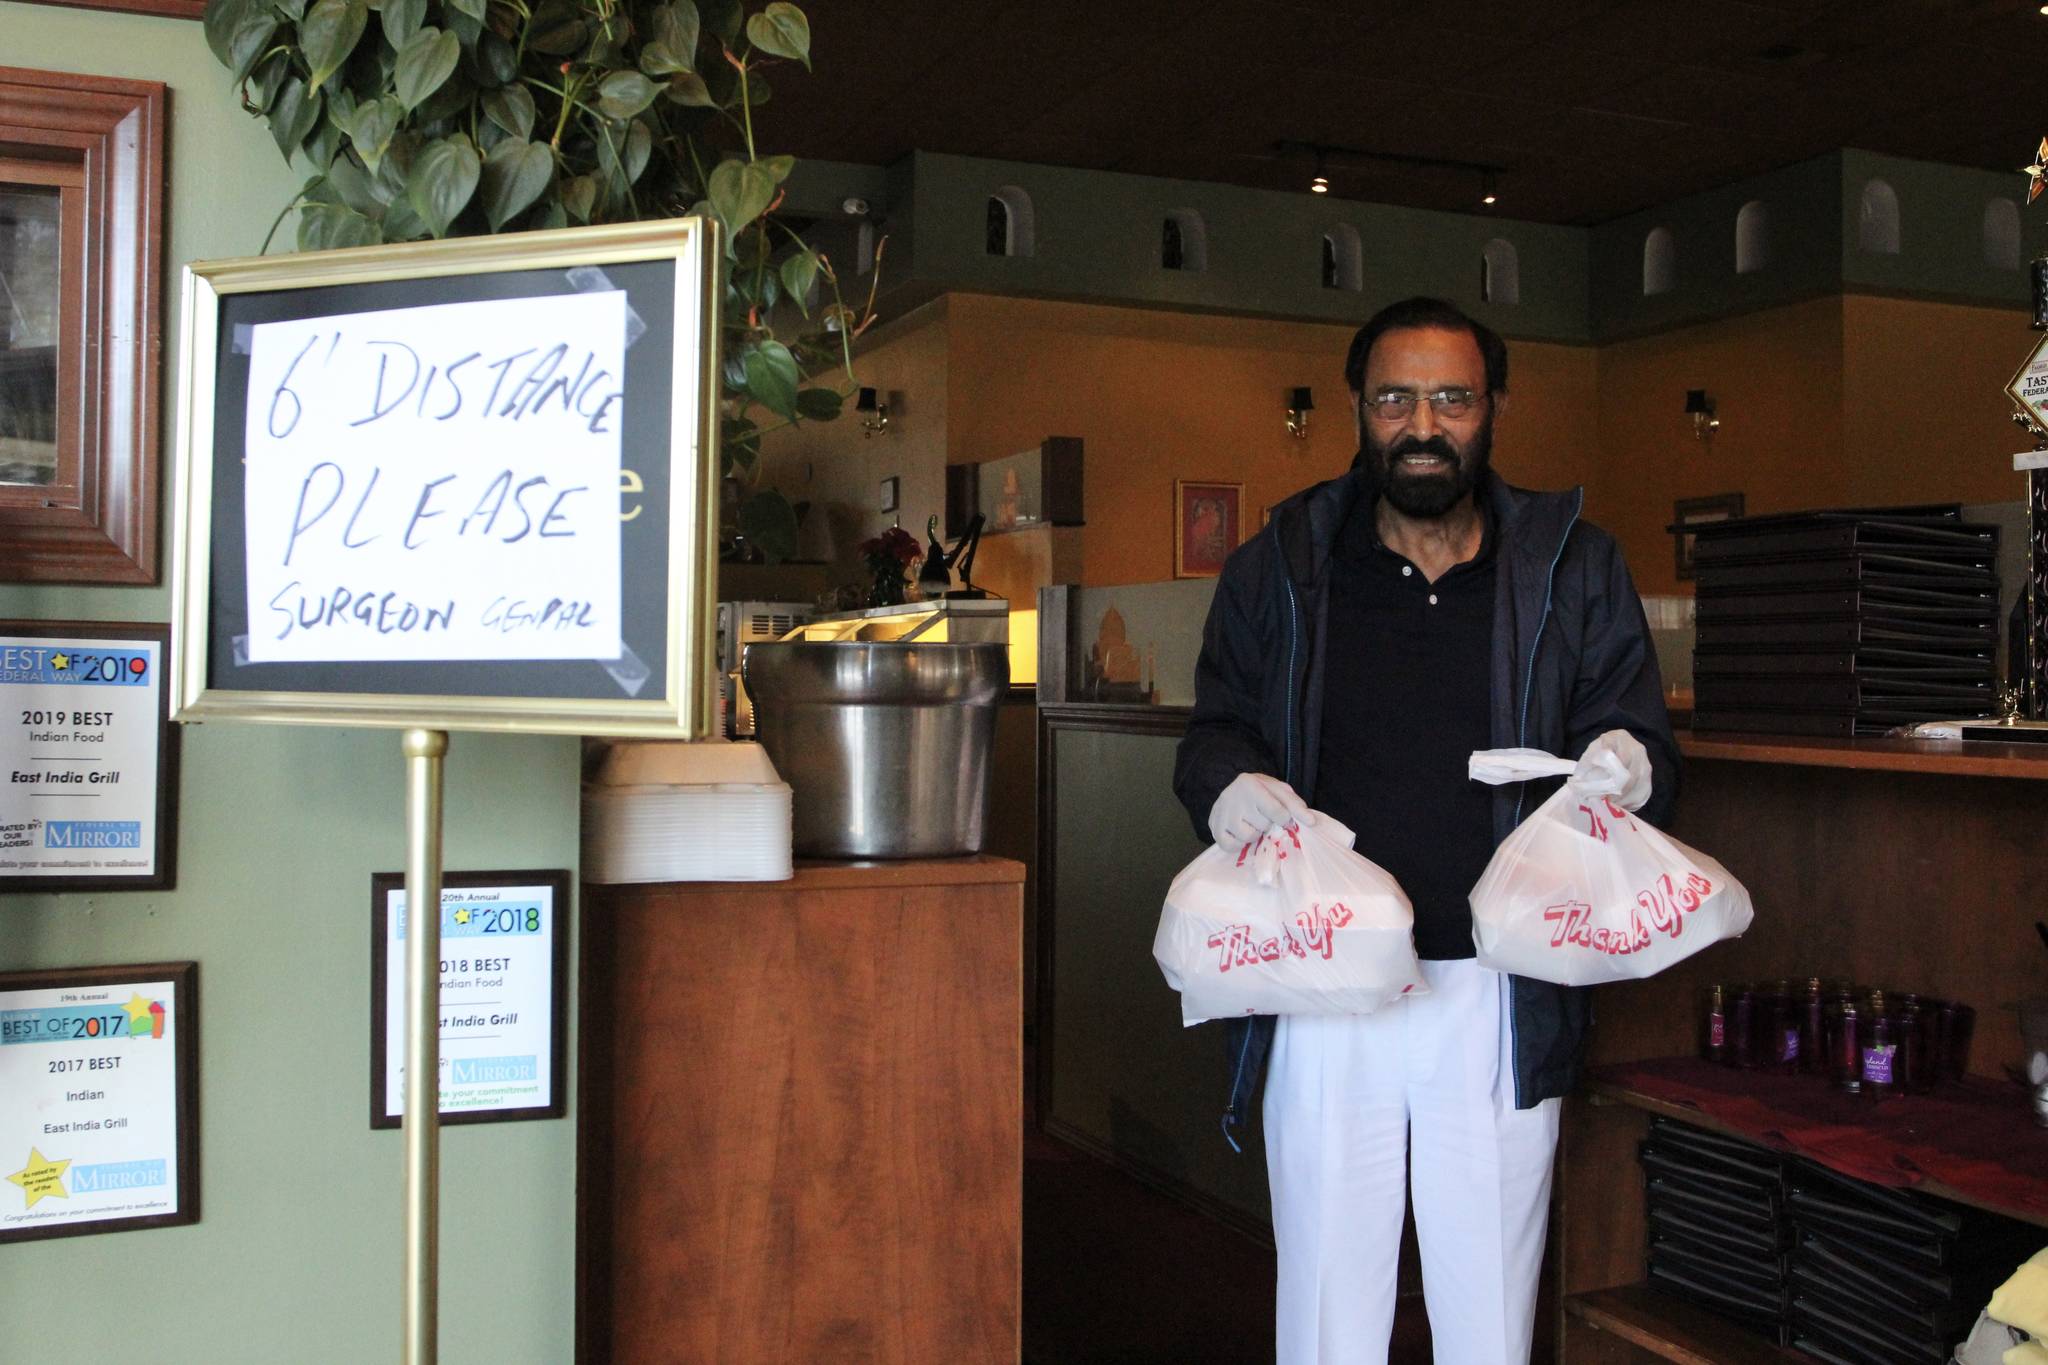 Kabal Gill, owner of East India Grill, wears gloves to hand over take-out orders at his restaurant on March 23, 2020. Olivia Sullivan/staff photo